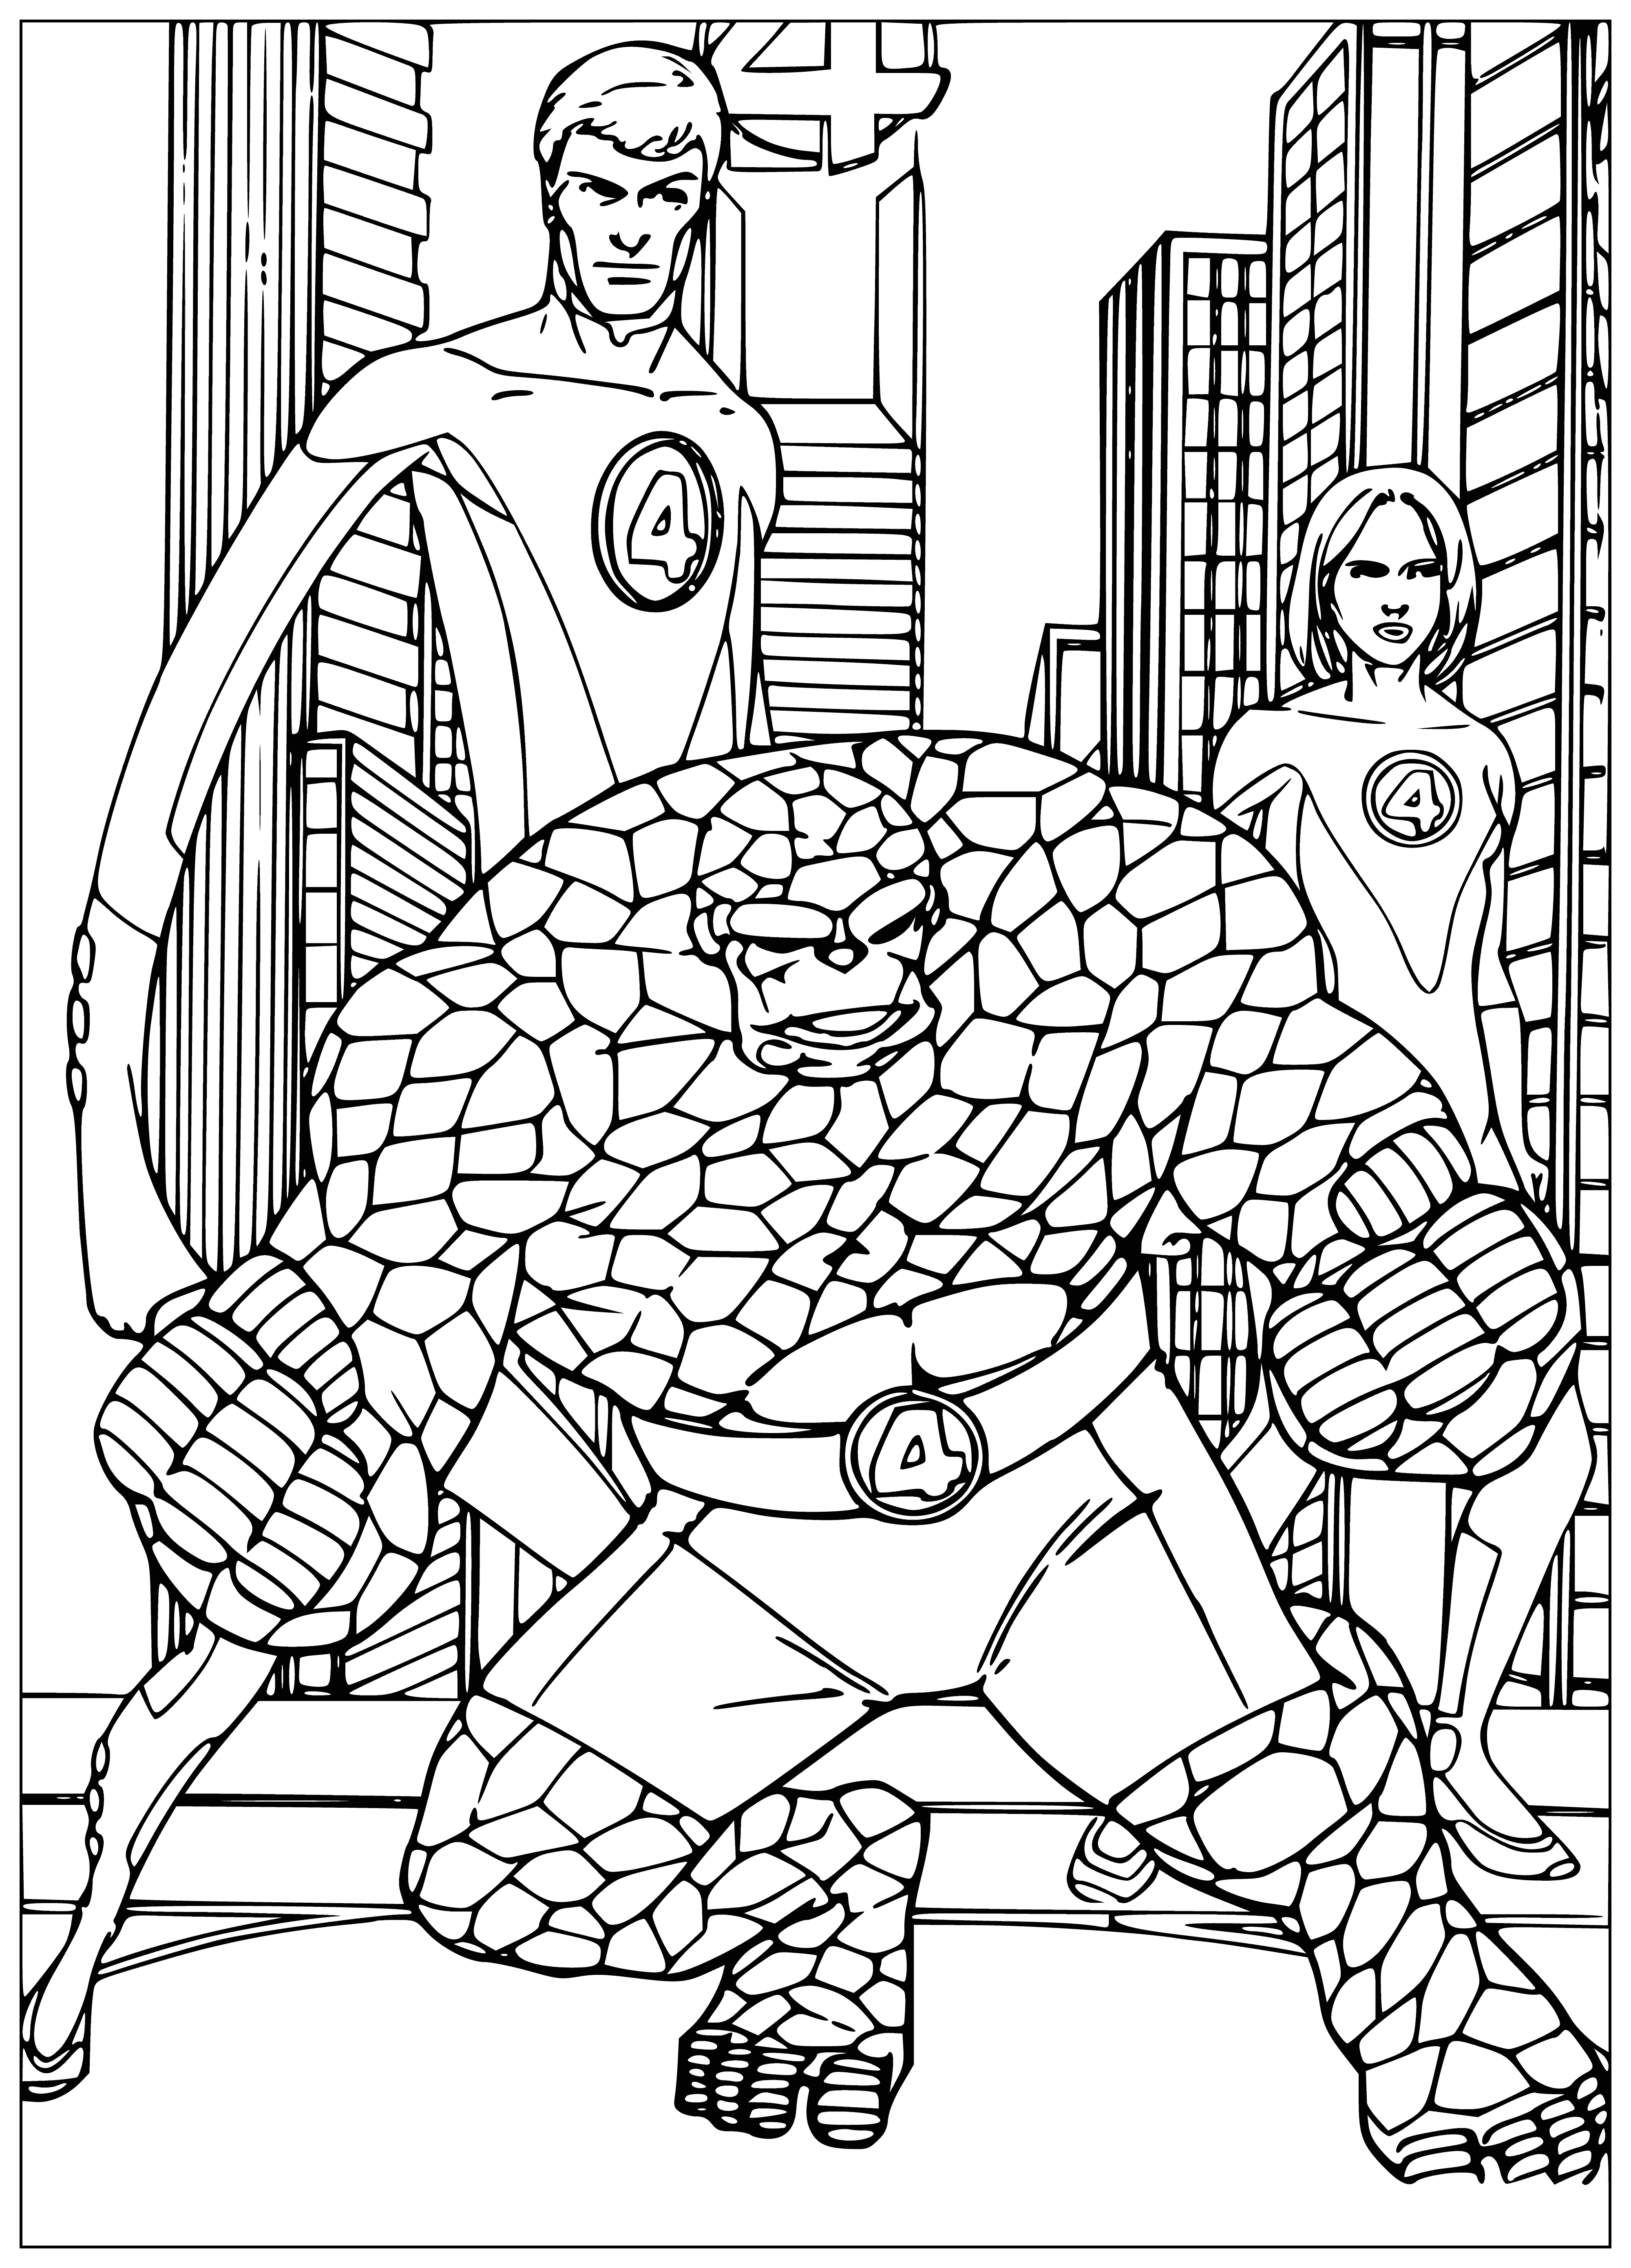 Three coloring page